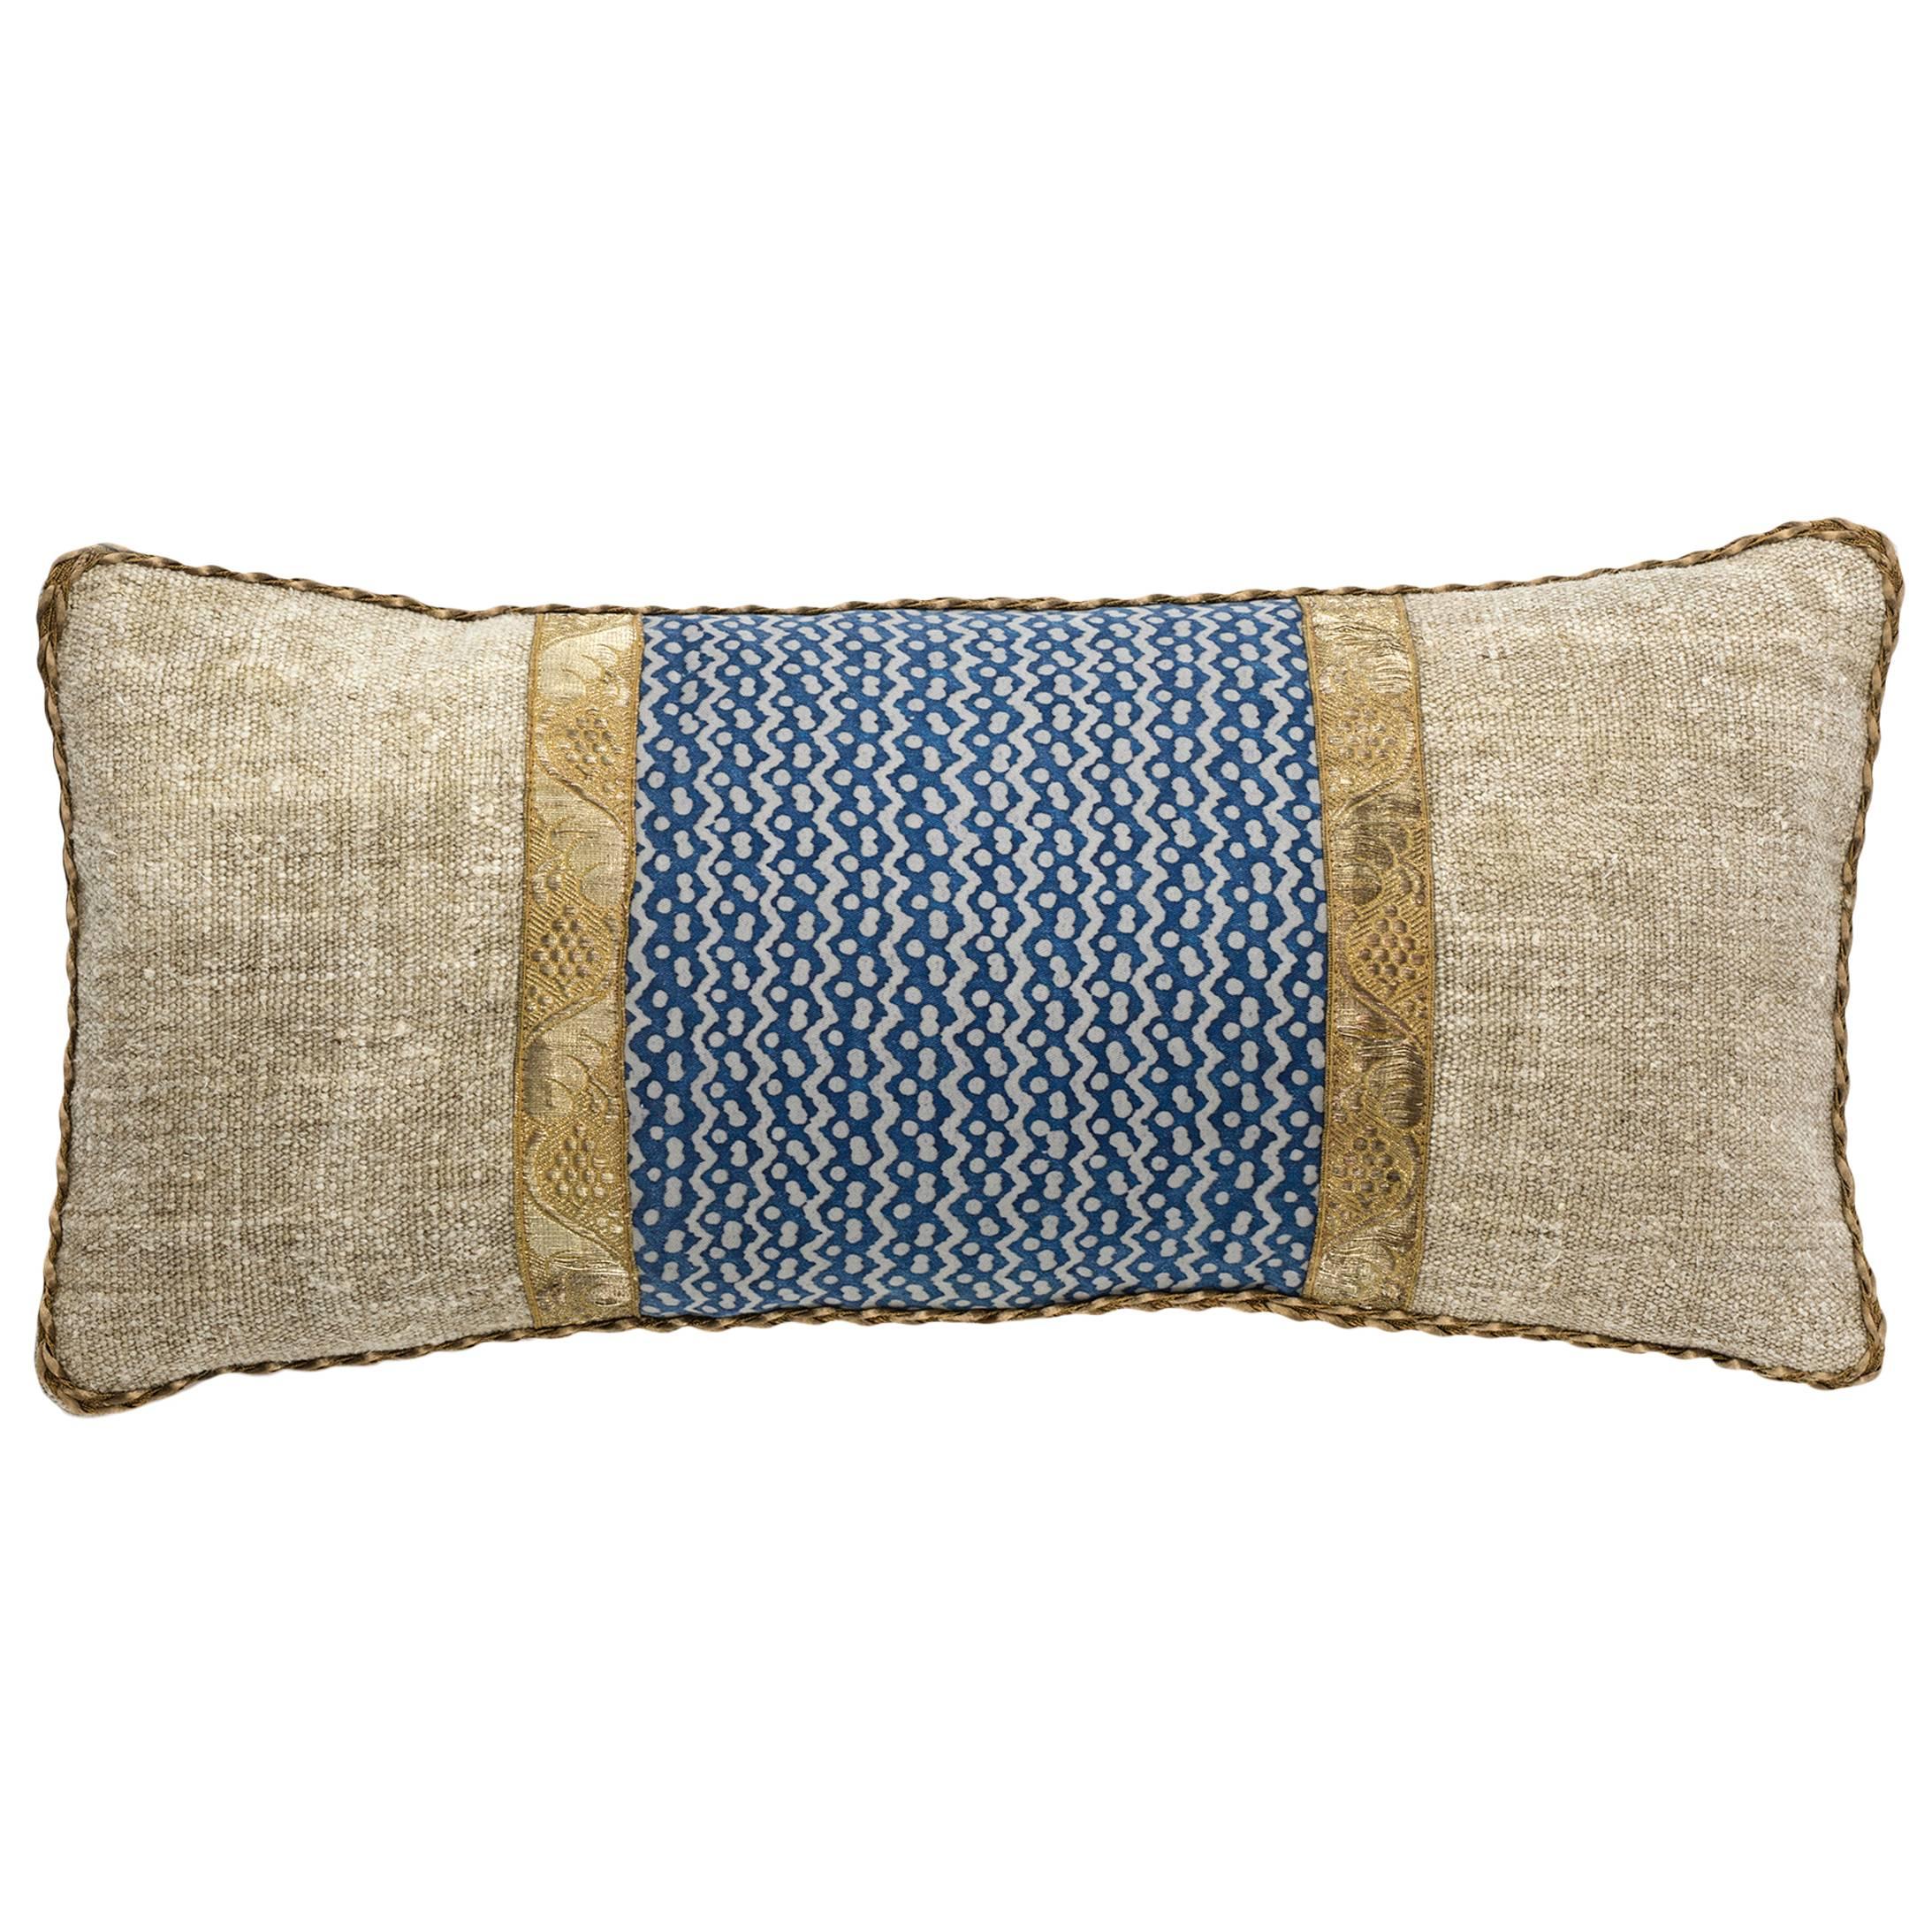 Fortuny with Antique Metallic Trim on Vintage Linen Pillow